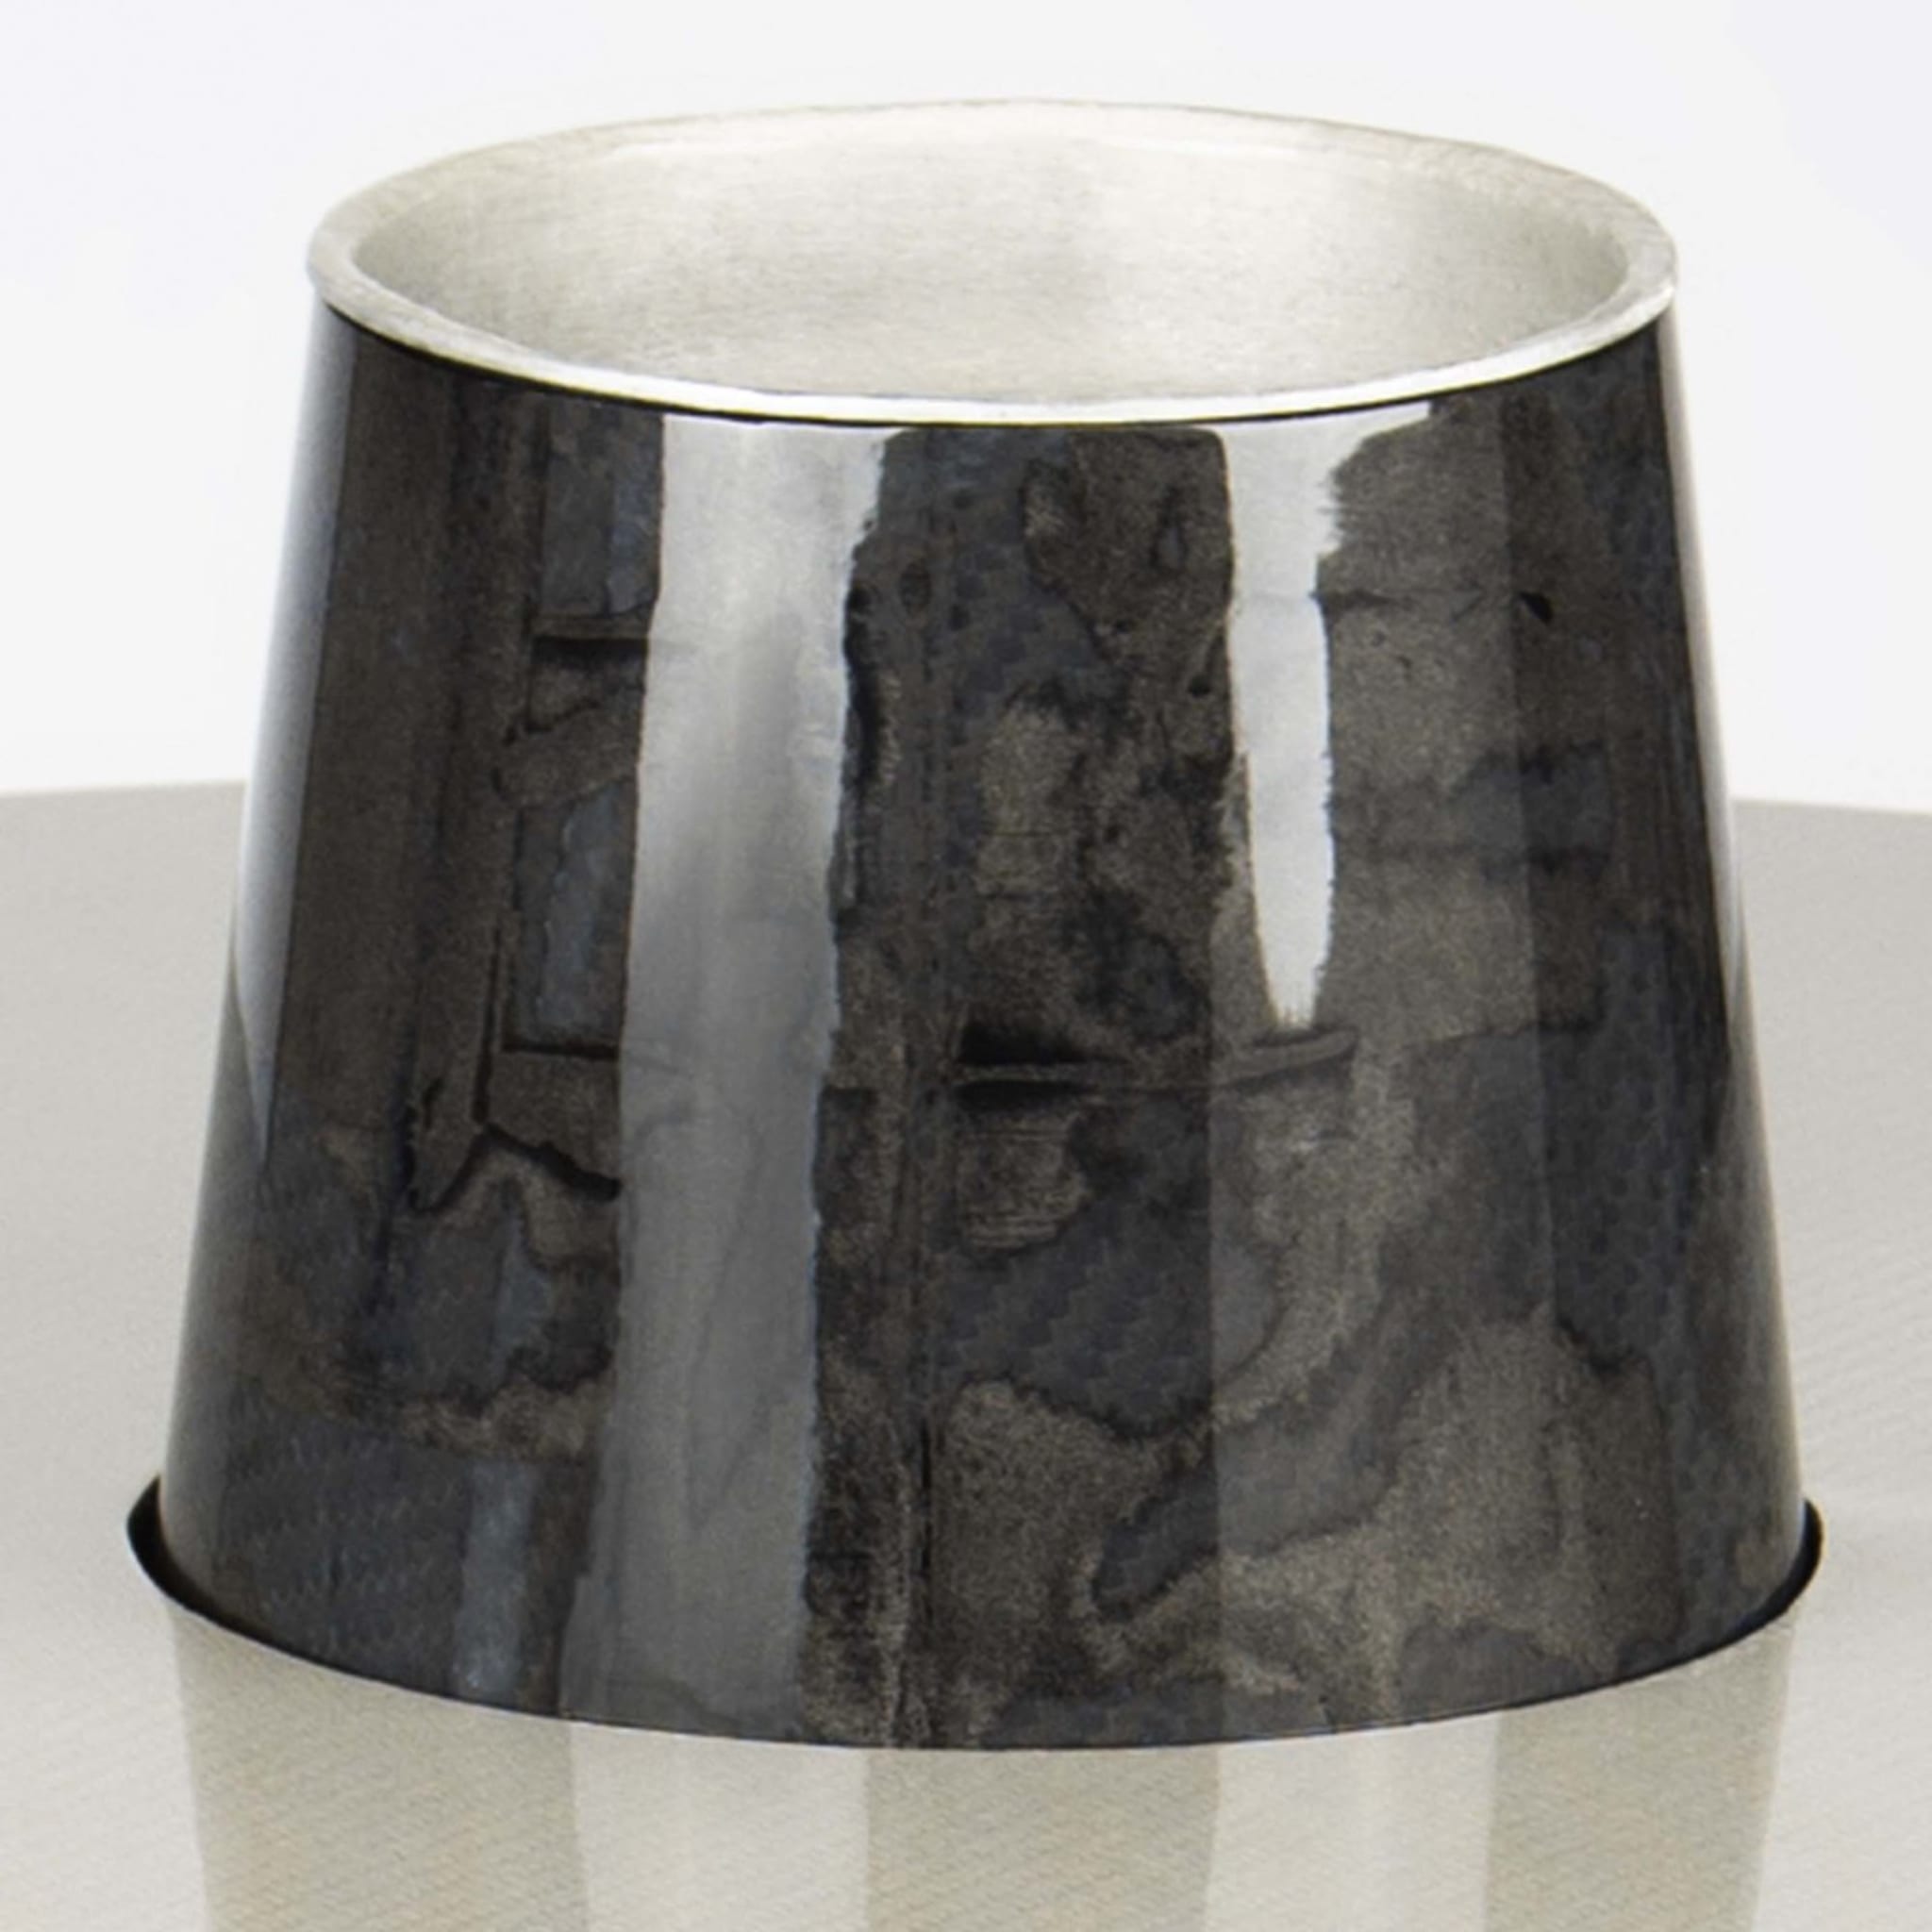 Invariants Silver Side Table - Alternative view 1